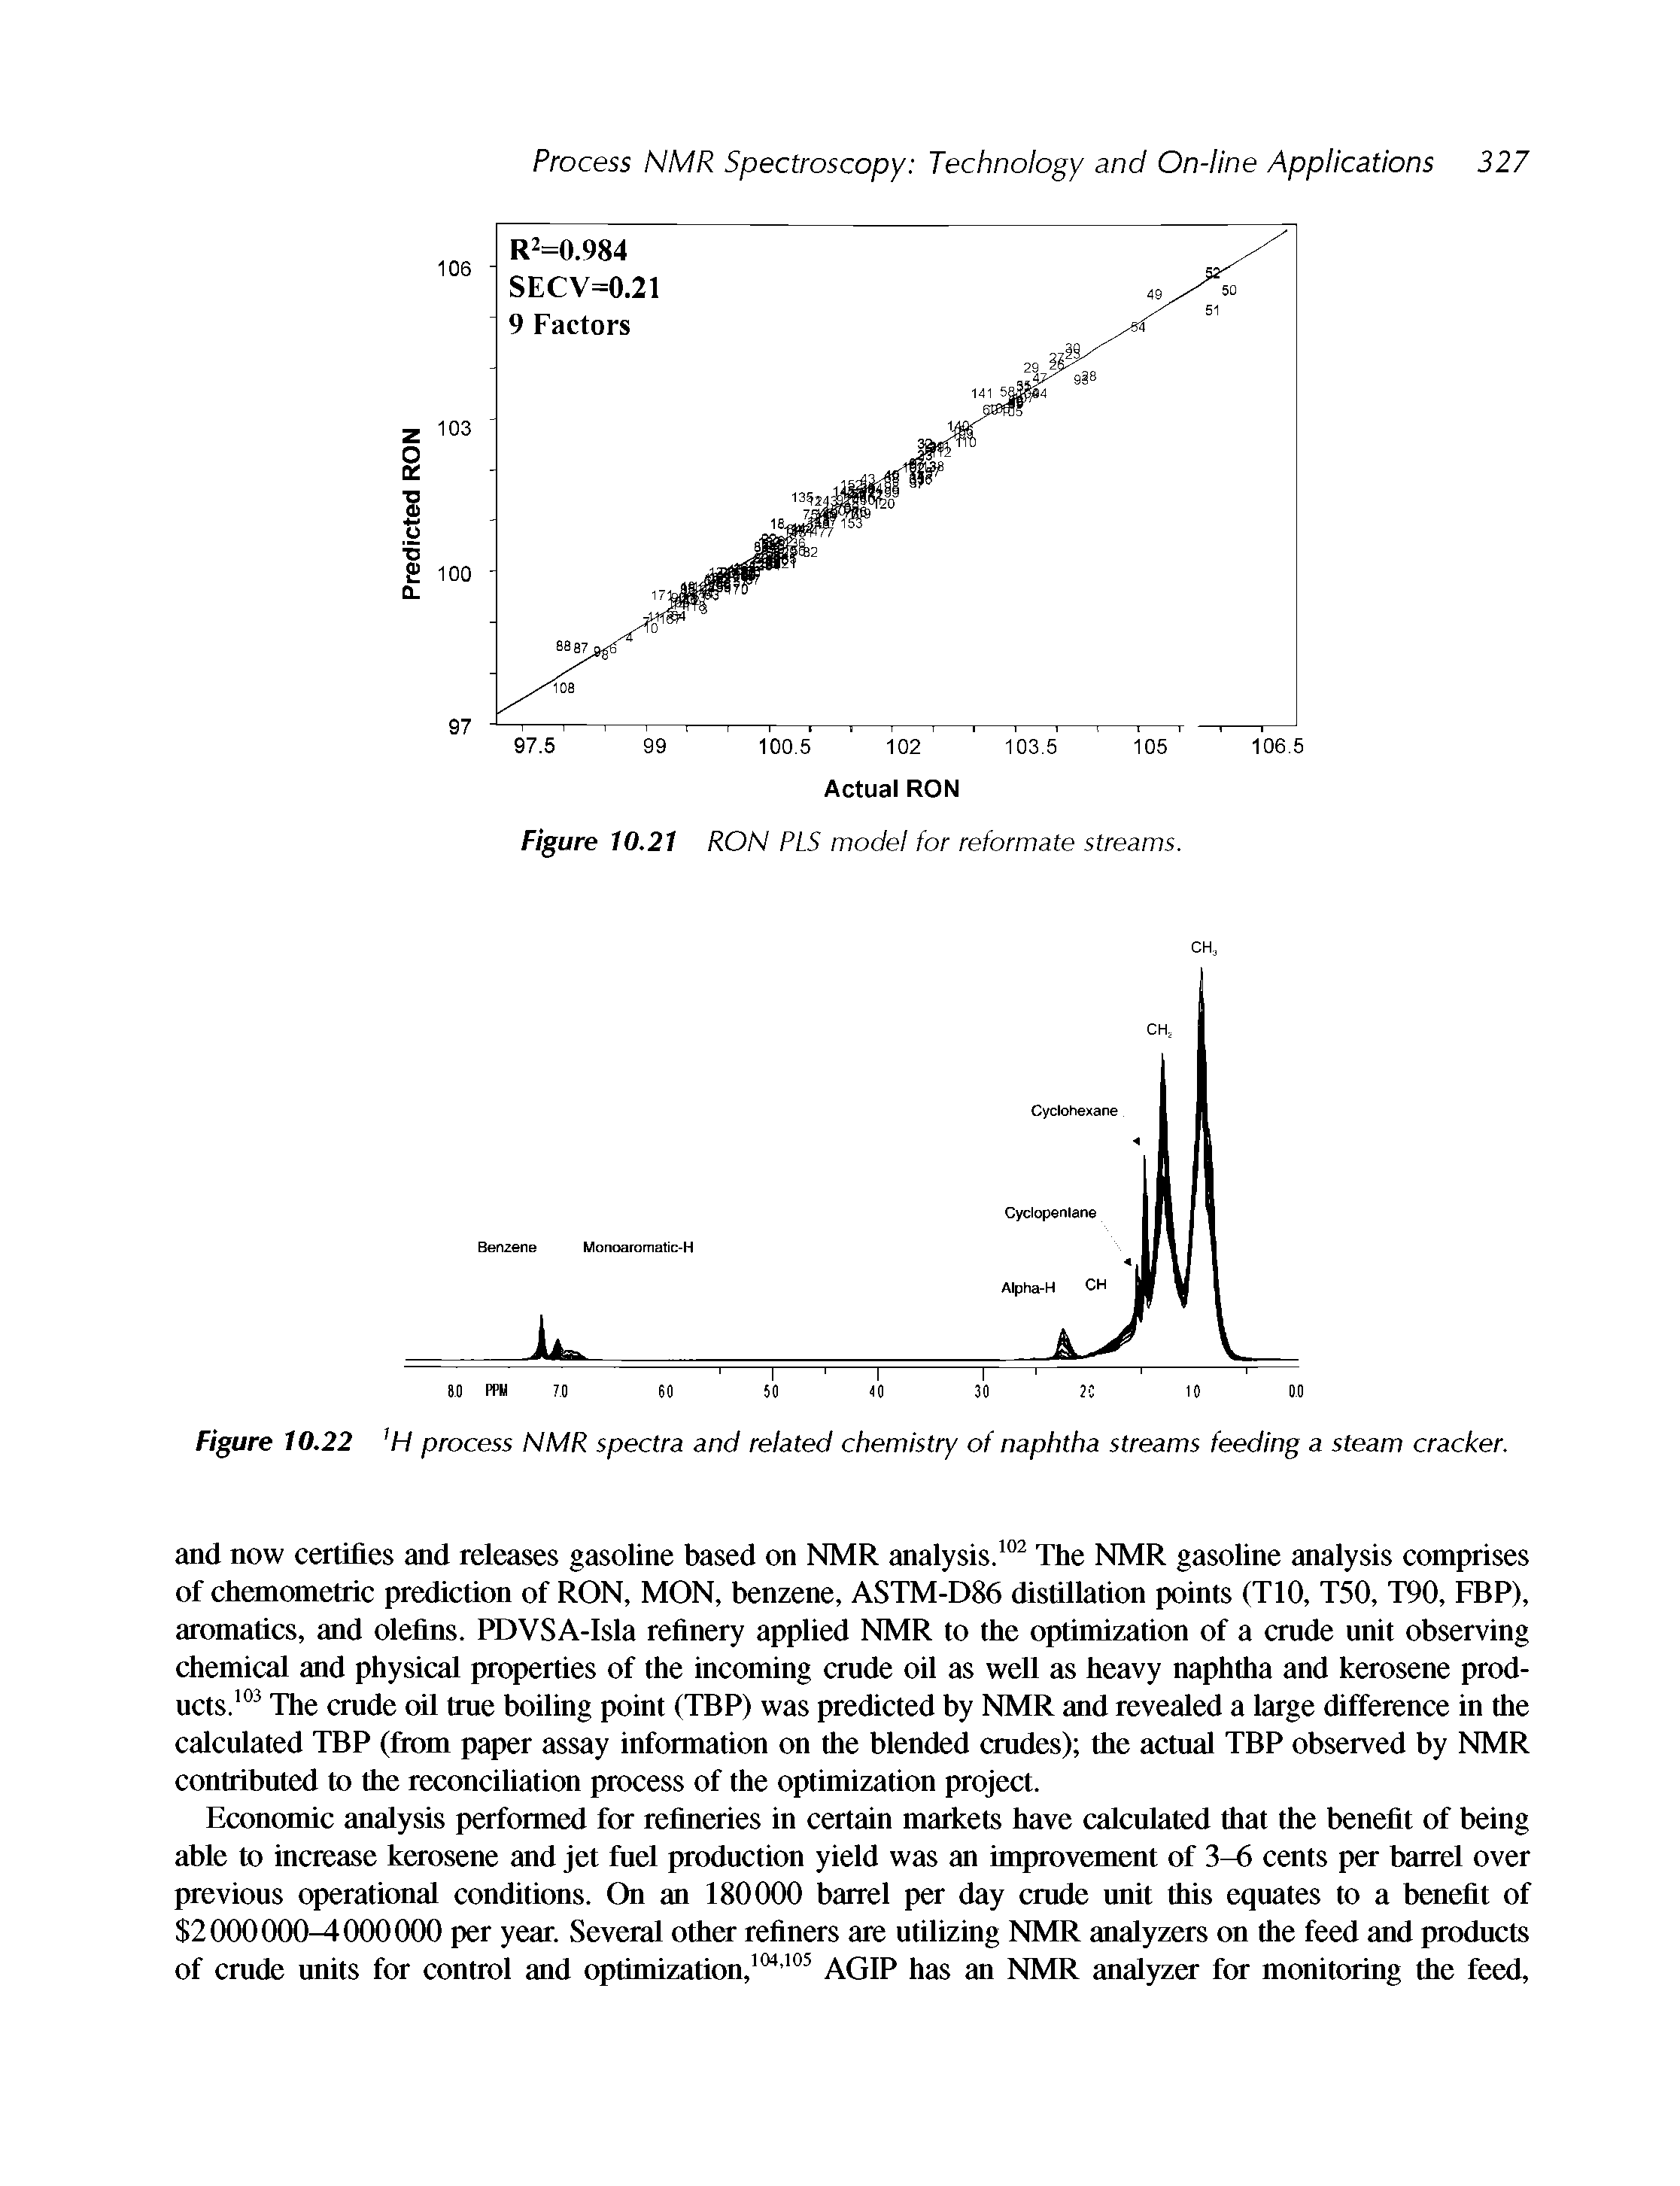 Figure 10.22 H process NMR spectra and related chemistry of naphtha streams feeding a steam cracker.